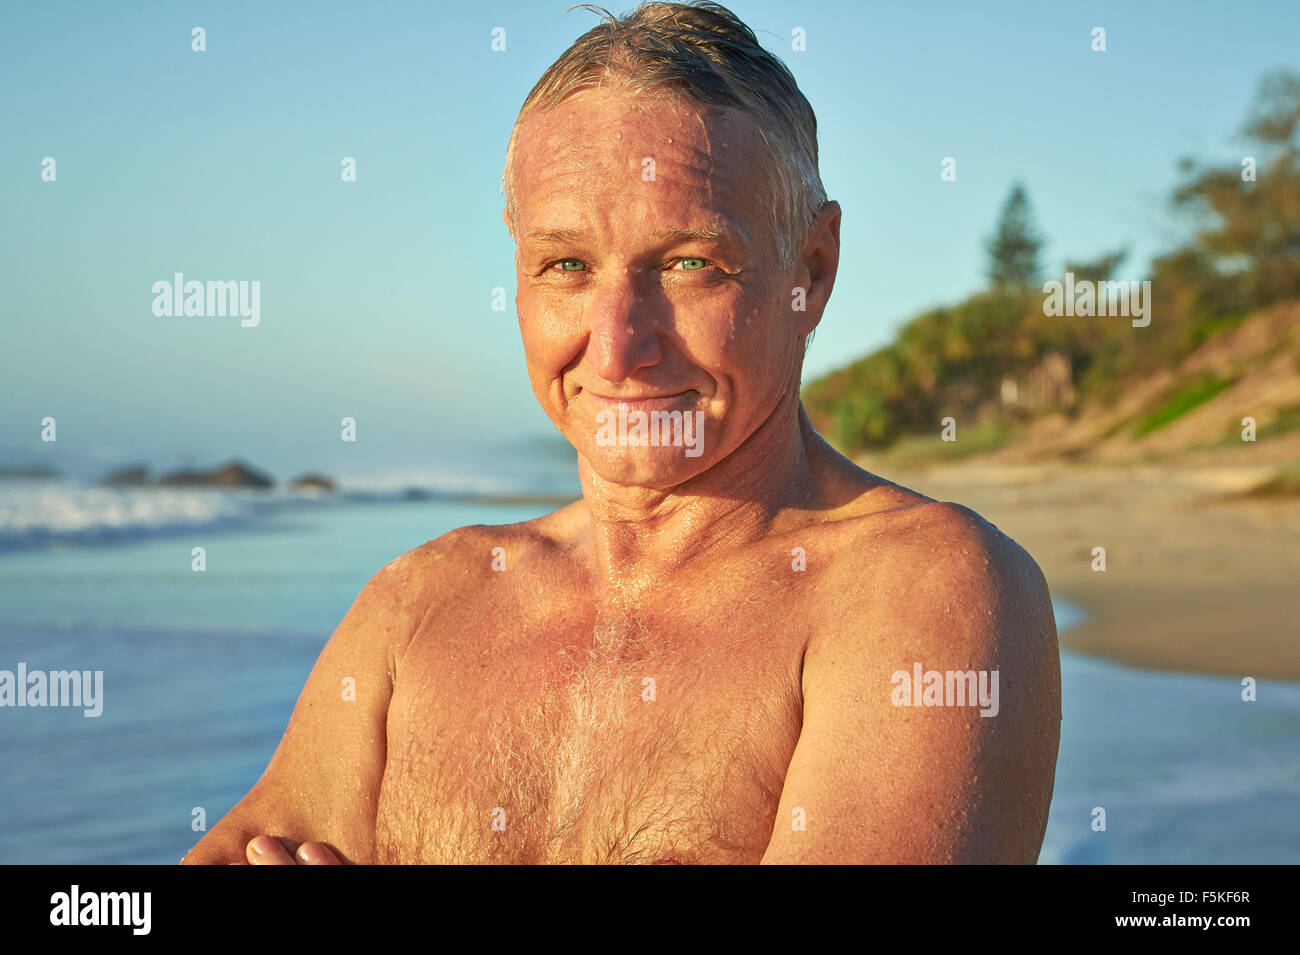 Mature aged man smiling after swimming in the ocean Stock Photo